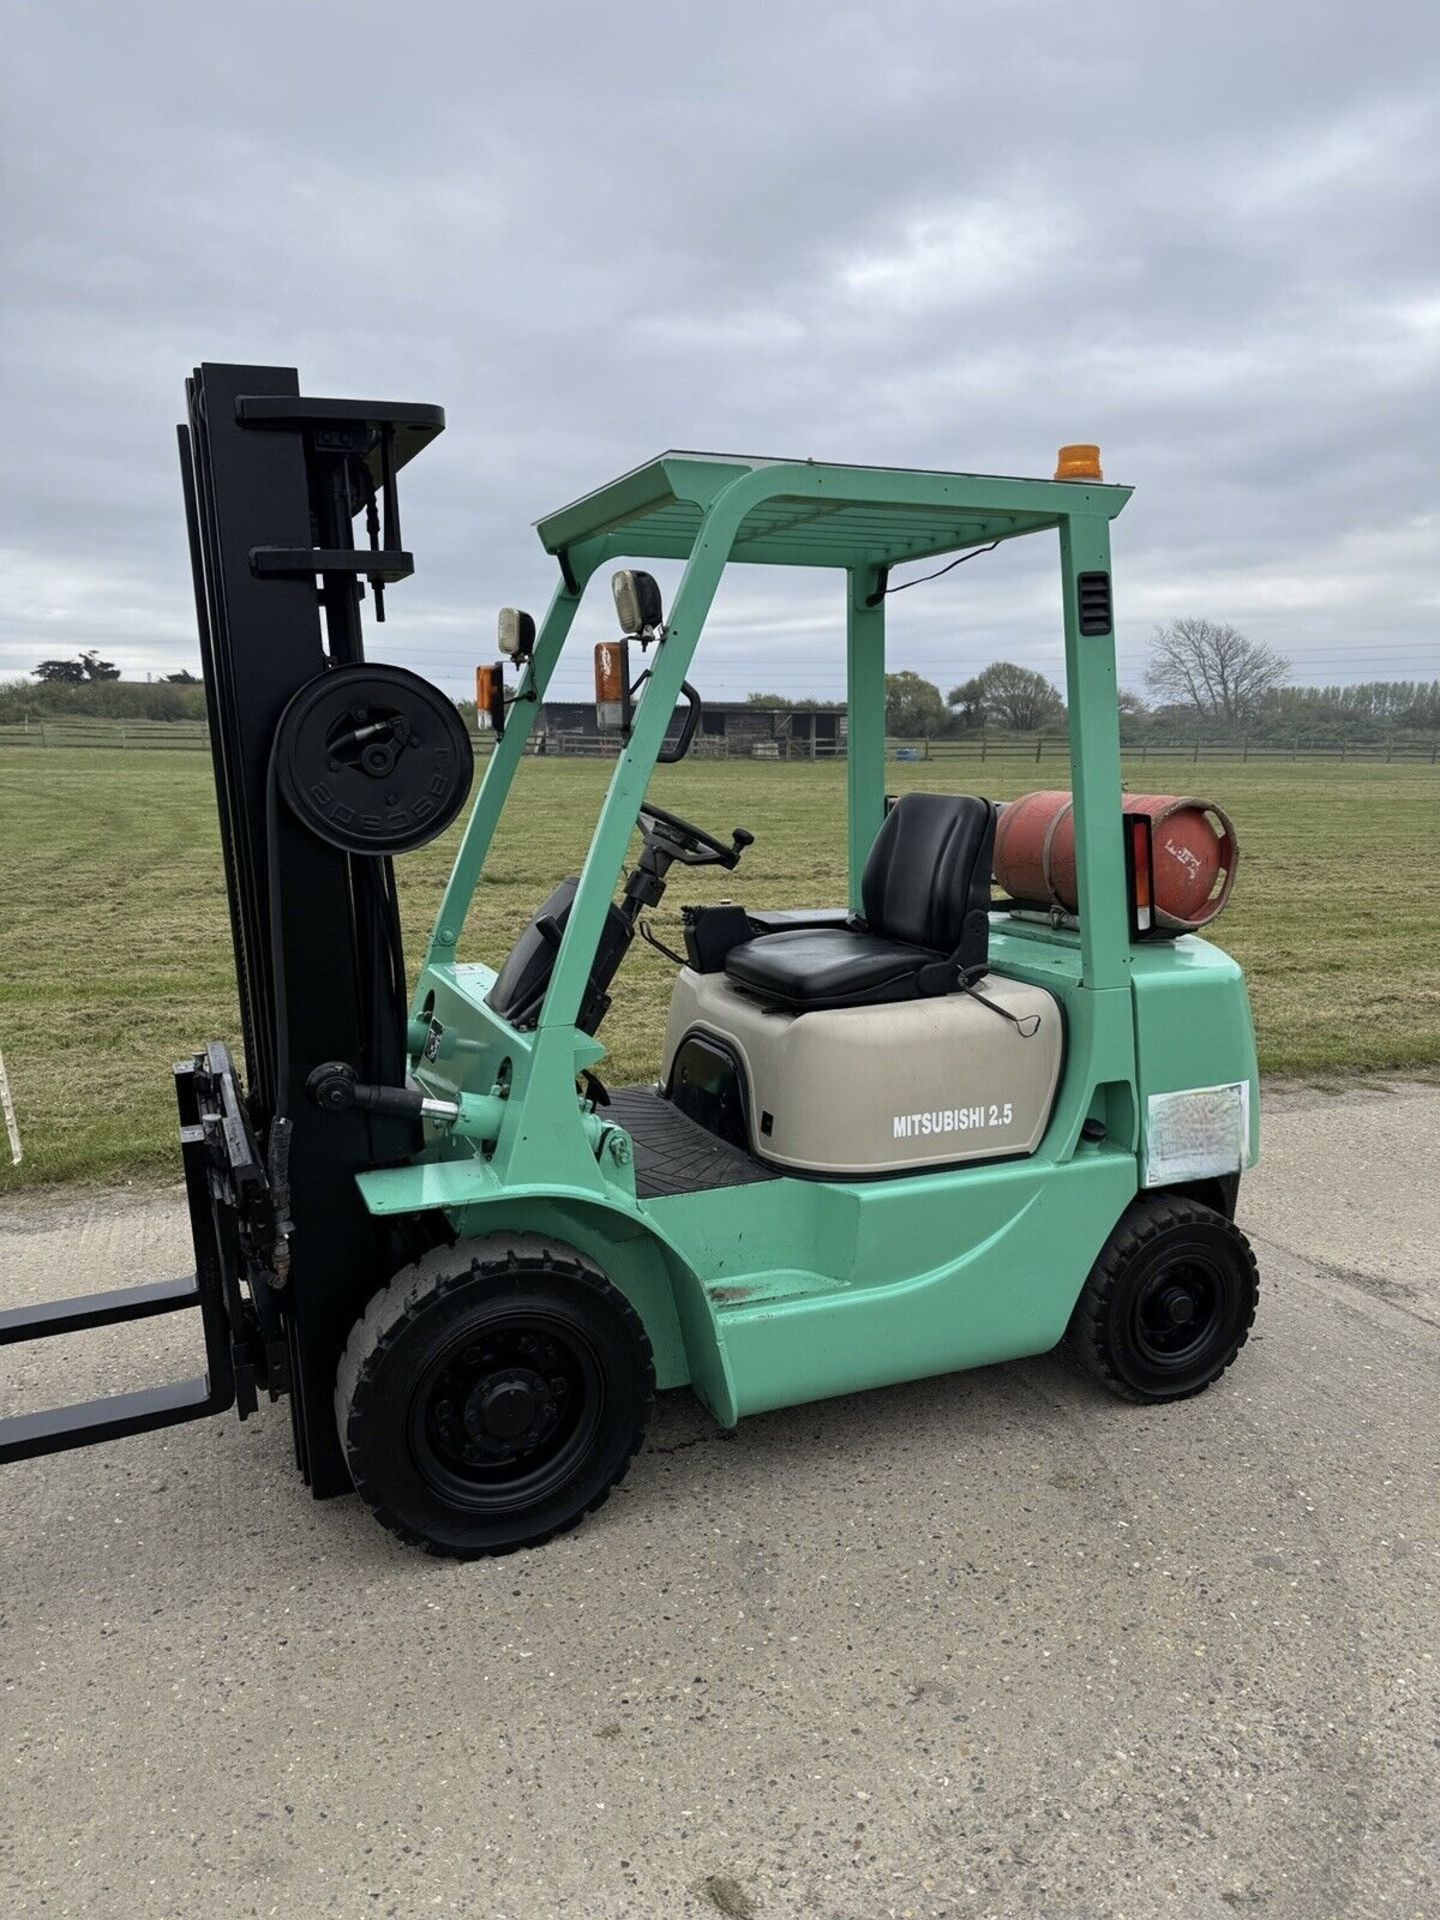 MITSUBISHI - 2.5 Tonne Gas Forklift (Container Spec) - Image 5 of 6